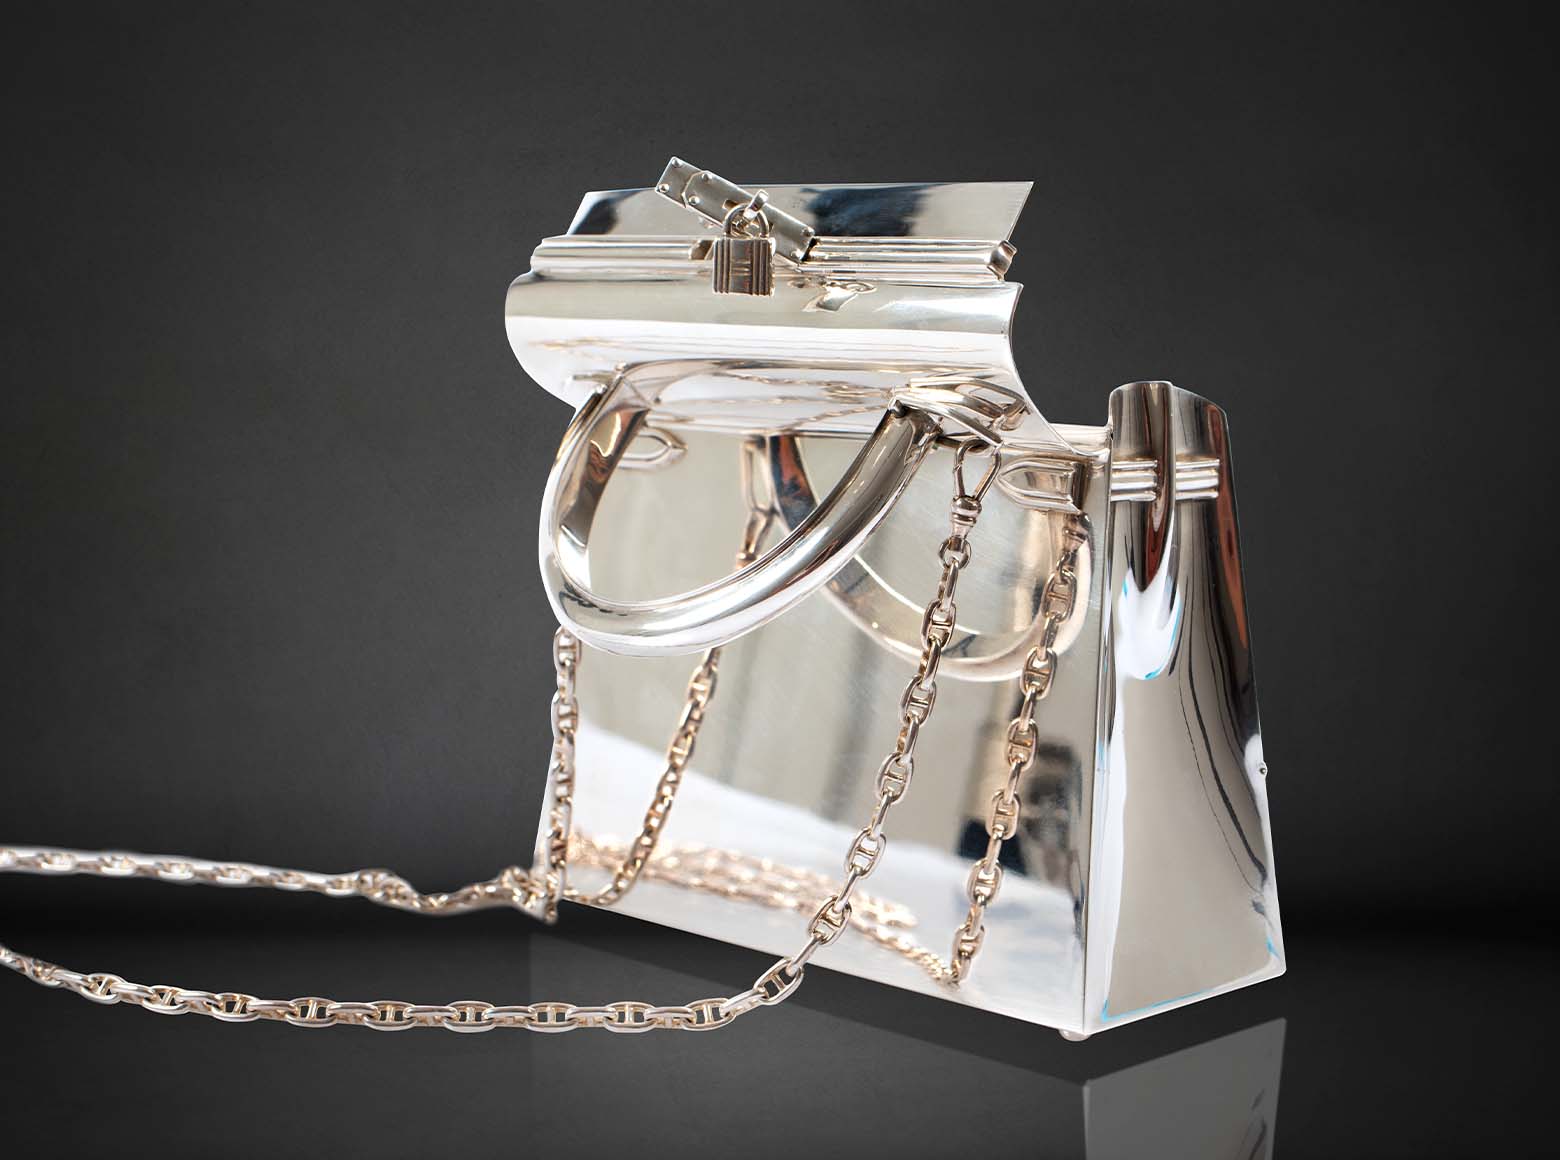 Hermes - To Have and to Hold - Bespoke Luxury Magazine